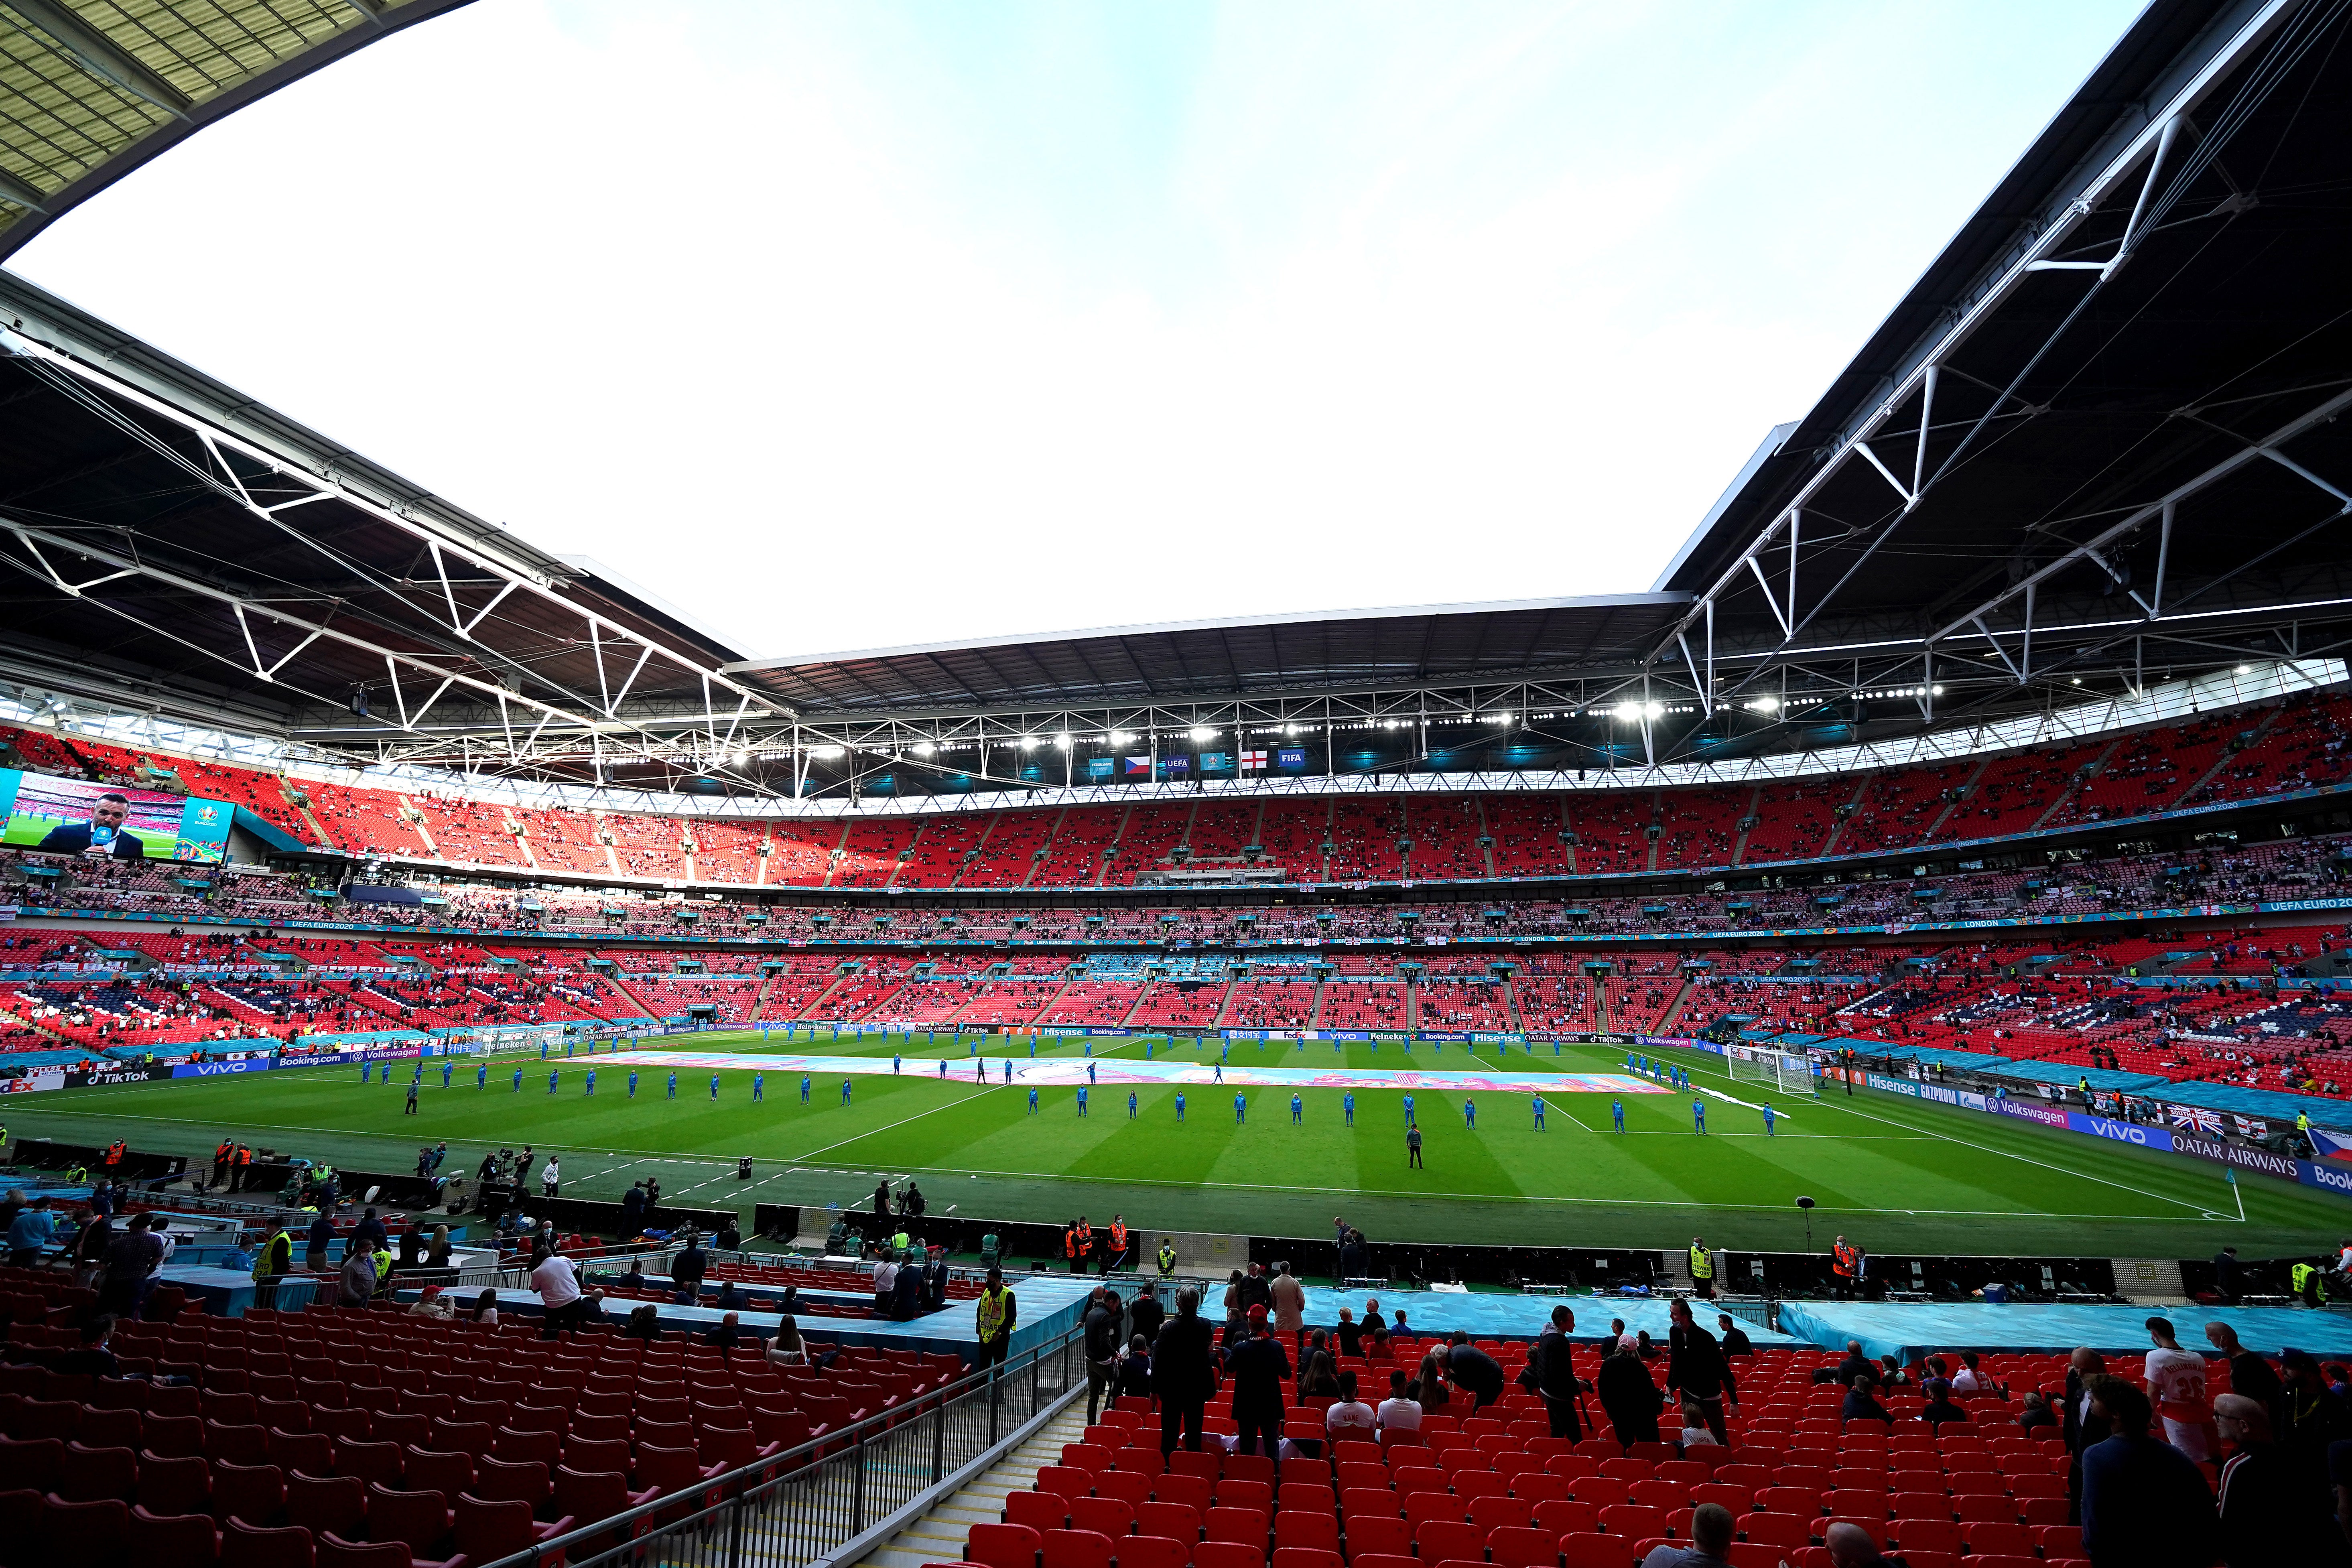 A deal granting limited exemption from quarantine for Euro 2020 VIPs is close to being agreed